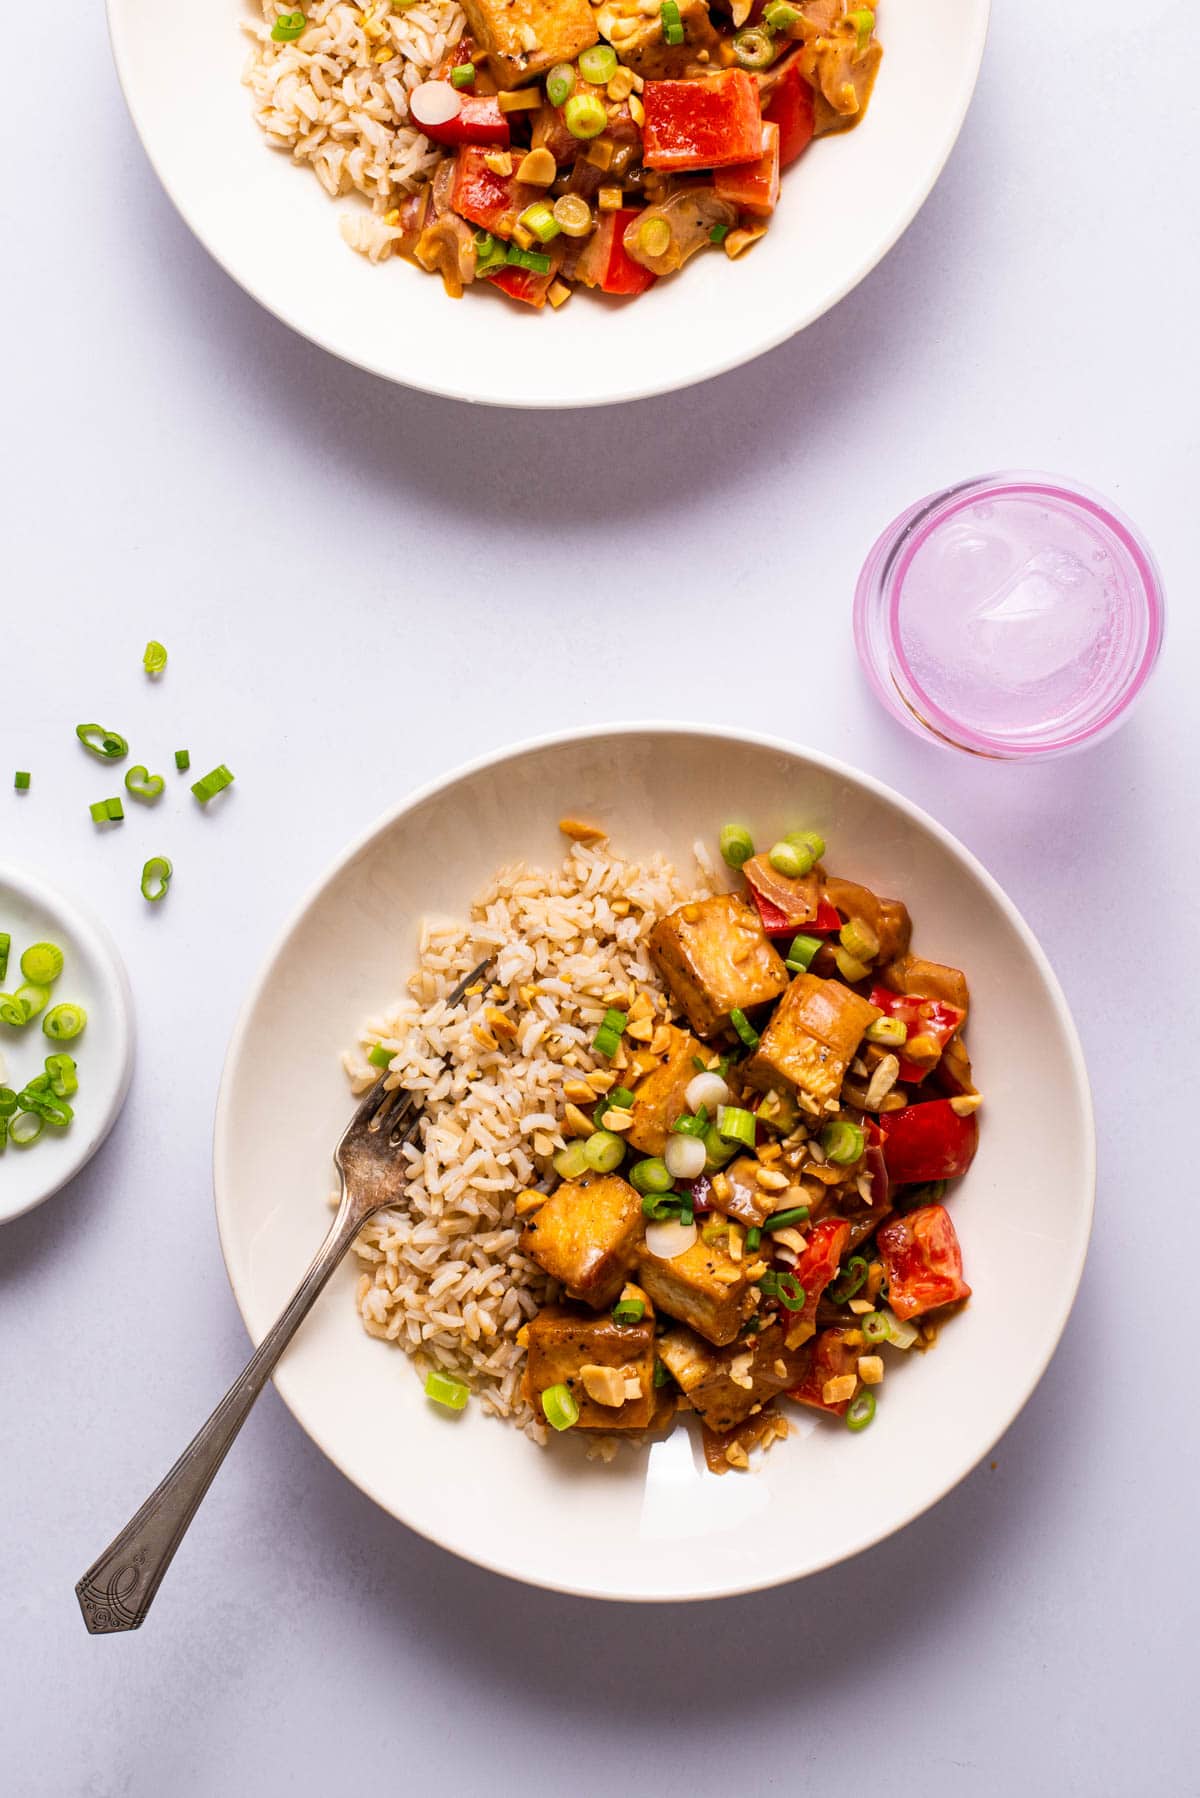 Peanut butter tofu stir-fry in white bowls with brown rice.